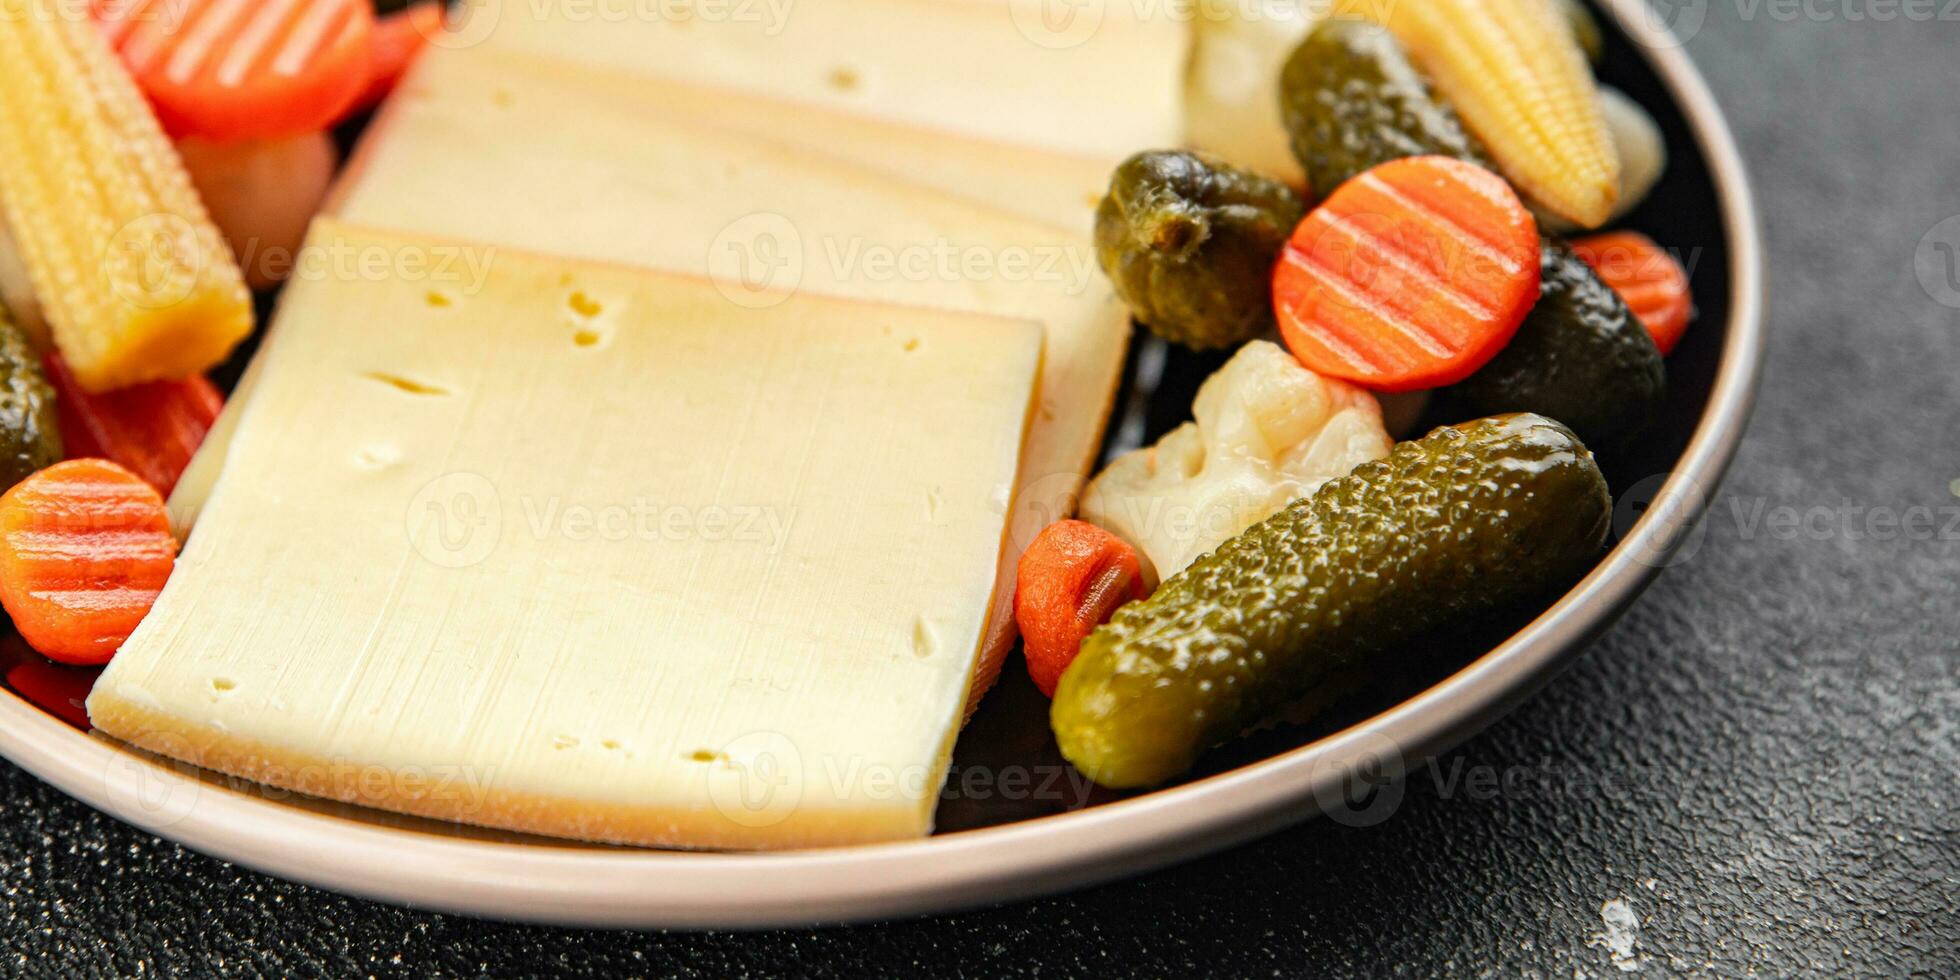 raclette cheese meal vegetable cooking eating appetizer meal food snack on the table copy space food background rustic top view photo